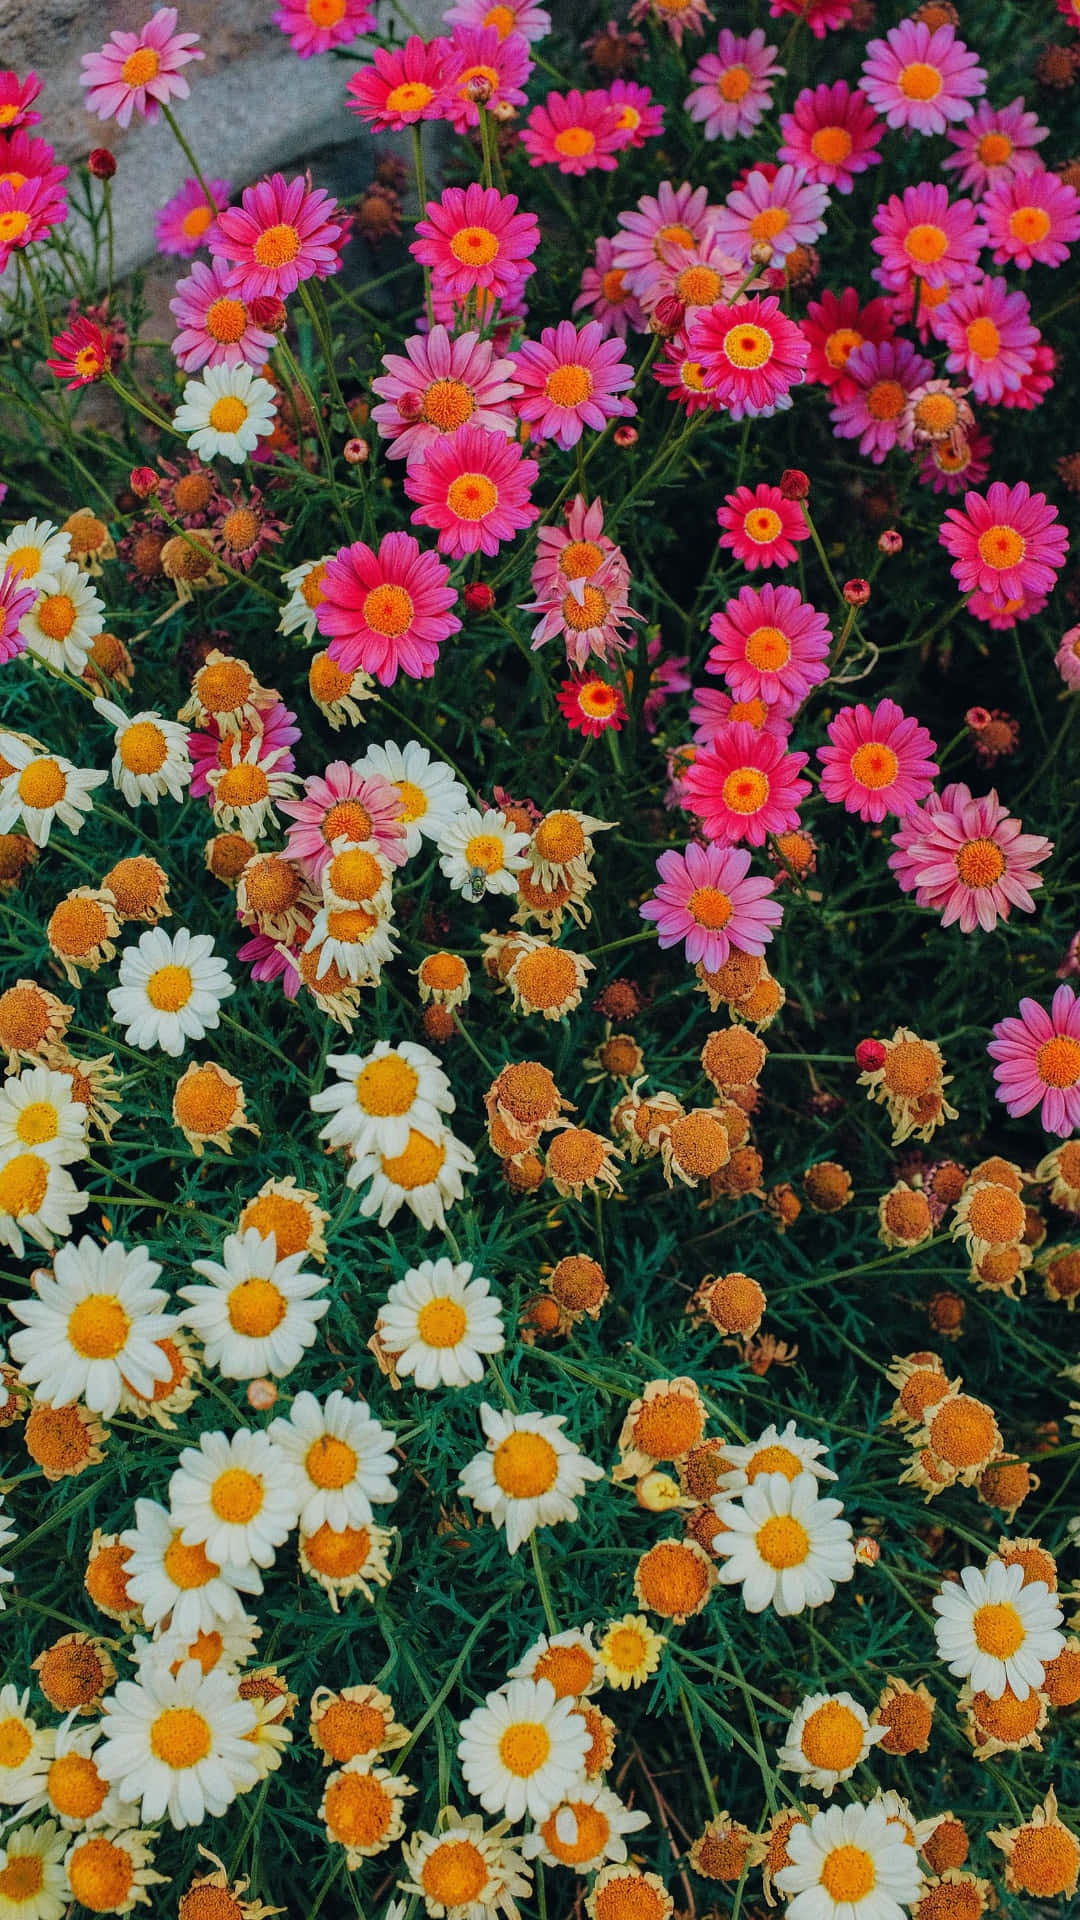 Caption: Beautiful Field Of Blooming Daisies